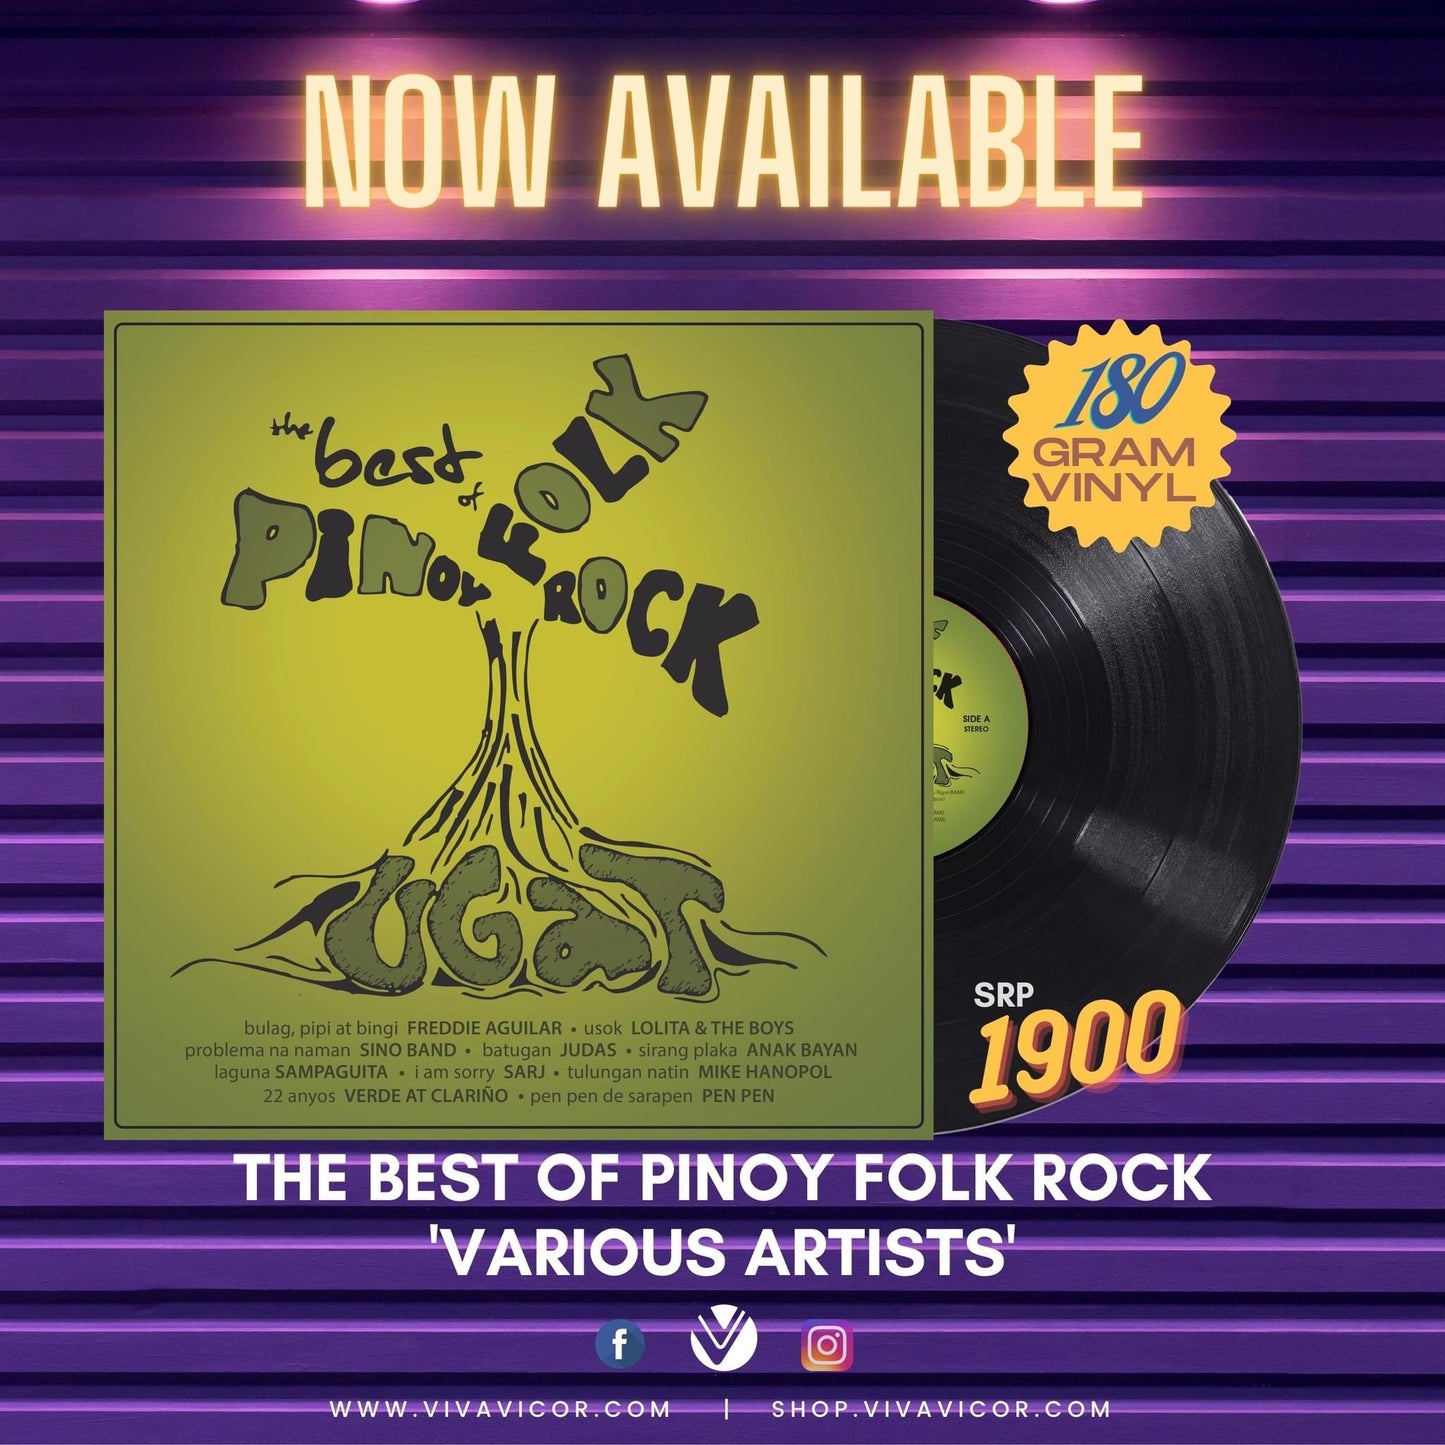 Ugat: The Best Of Pinoy Folk Rock - Various Artists LP (Vicor Reissue)